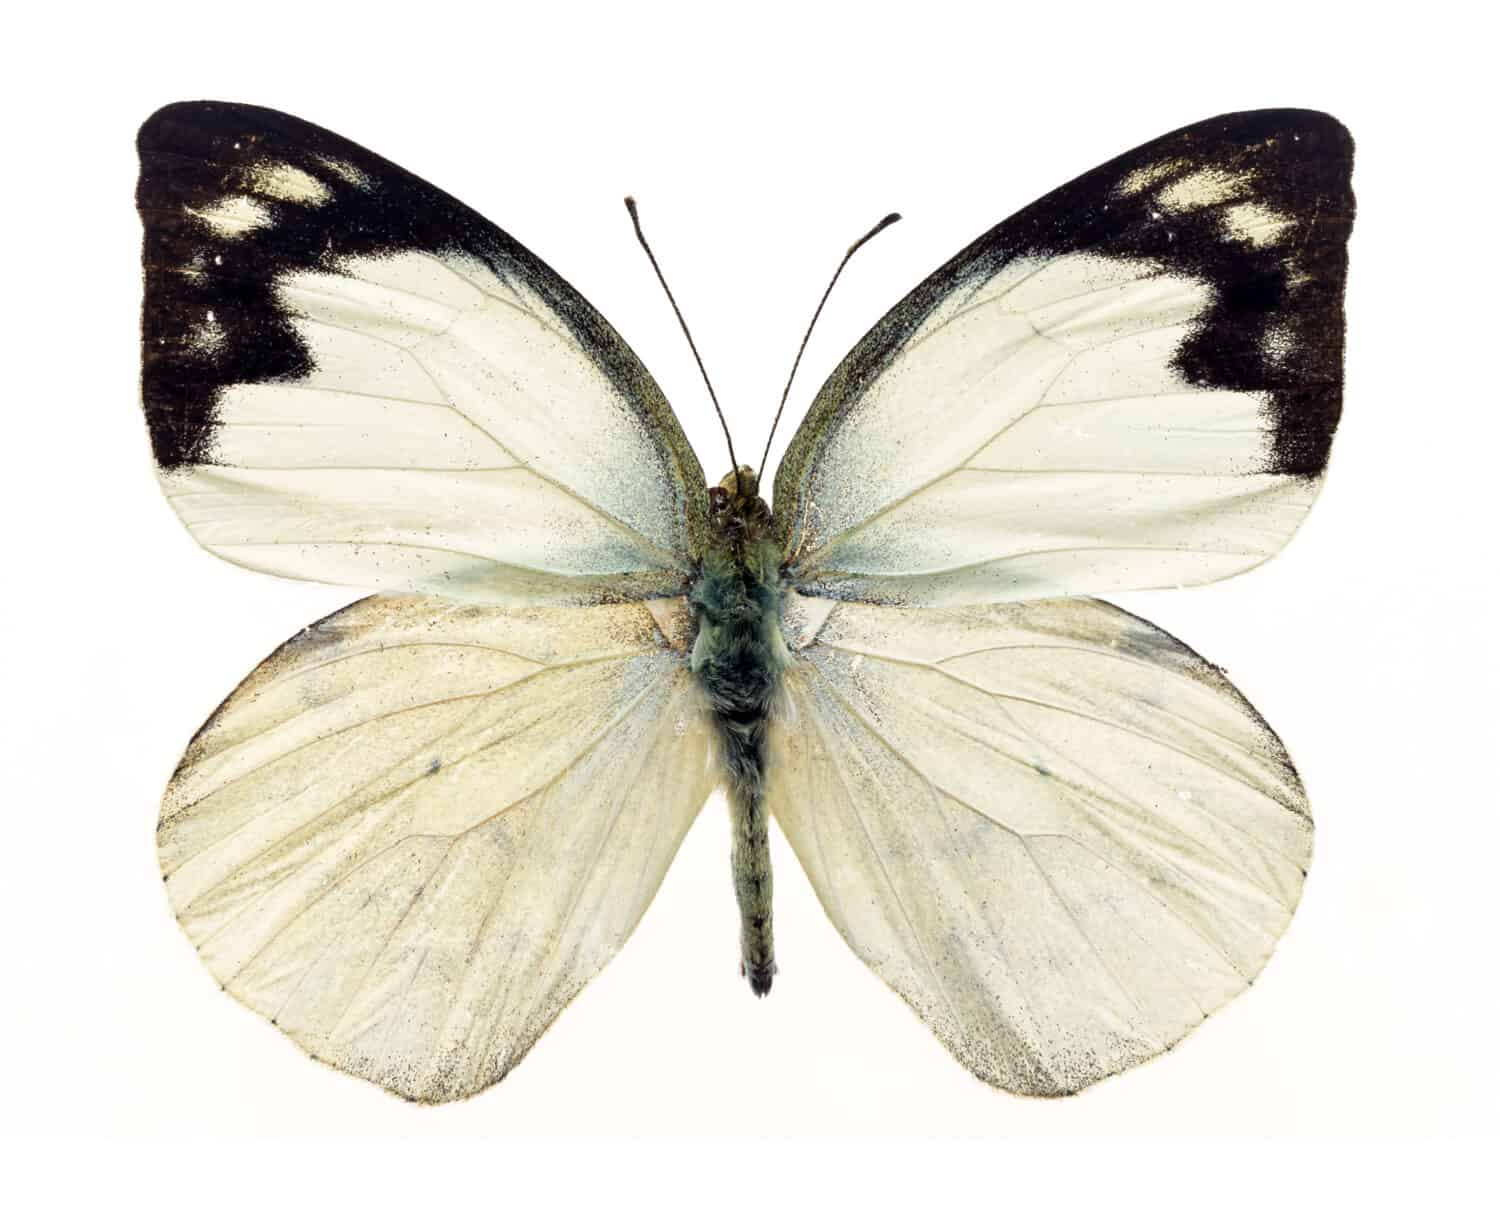 White wings butterfly with black marginal markings on white background isolated